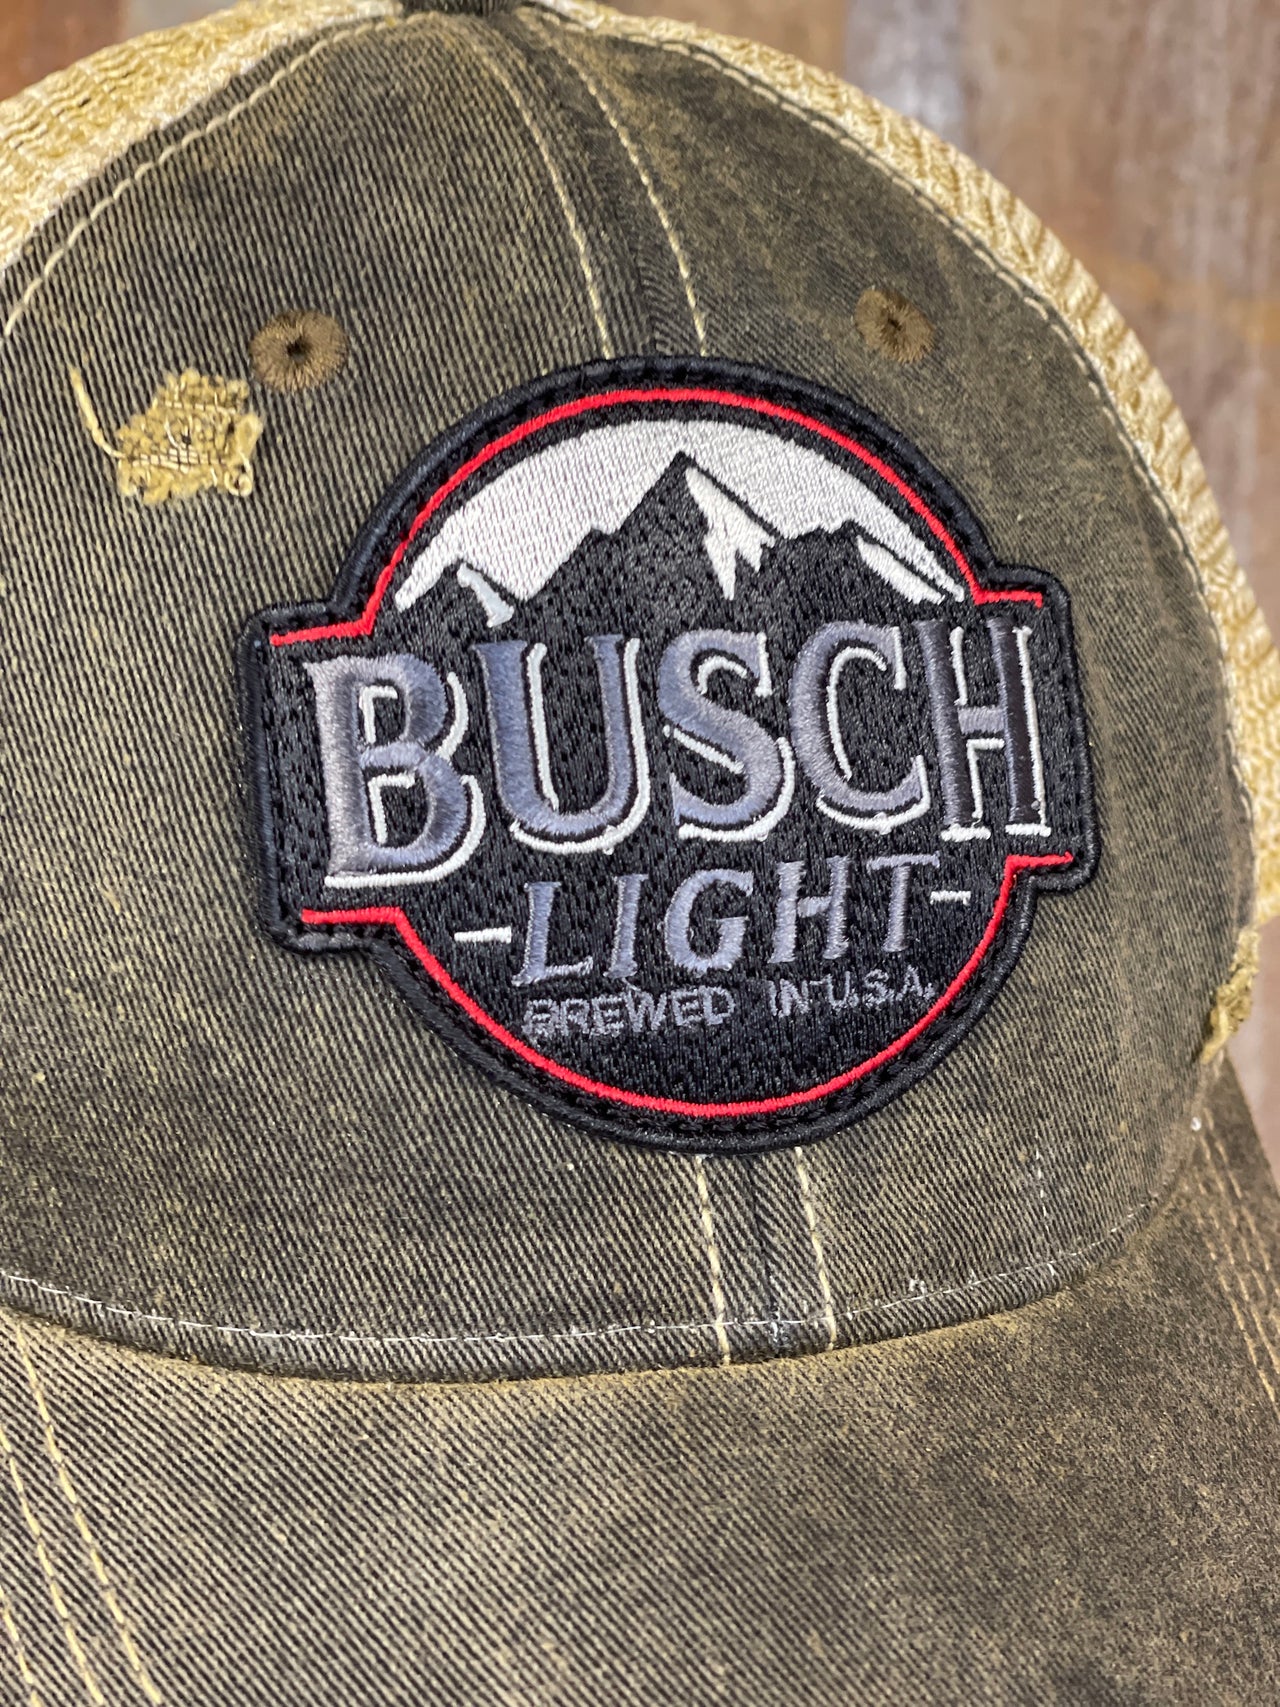 Busch Light Hats at Angry Minnow Vintage